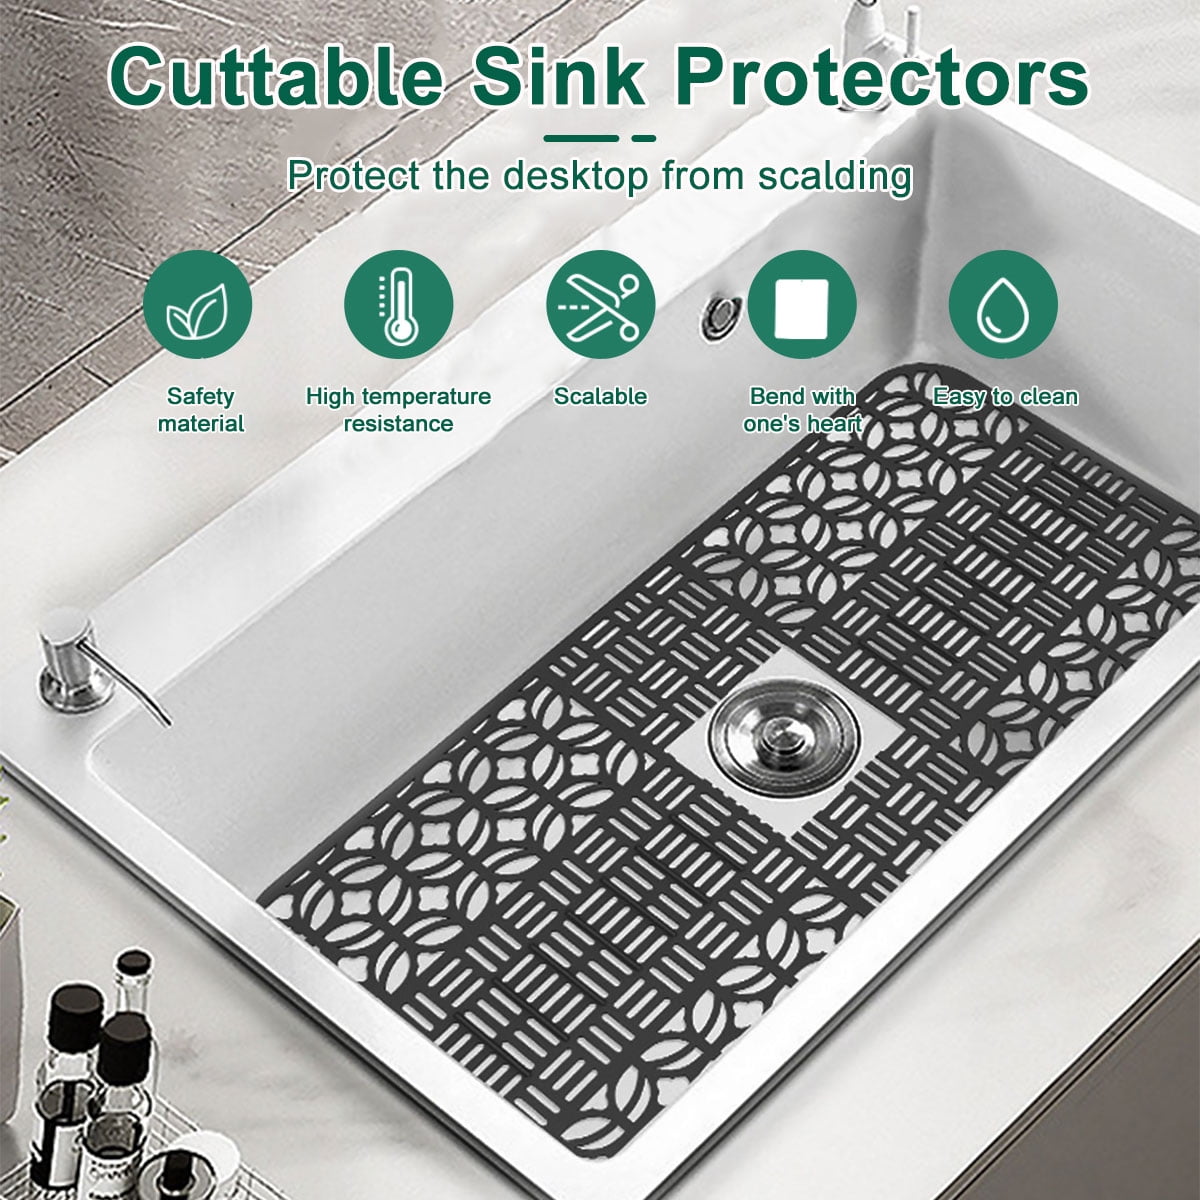 Silicone Sink Protectors for Kitchen Sink, 25” x 13” Non-slip Heat